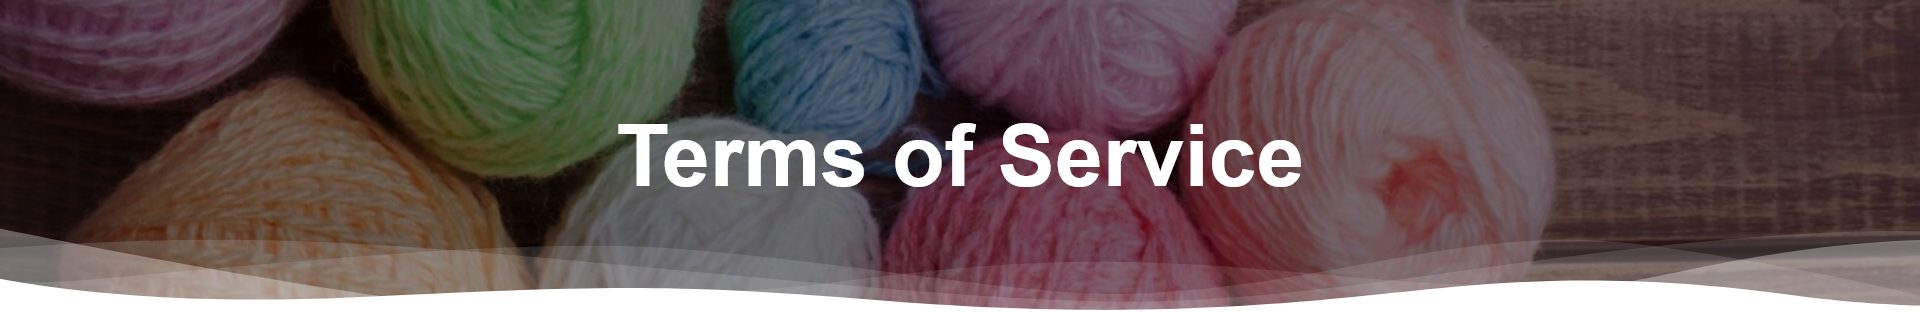 Terms of service banner